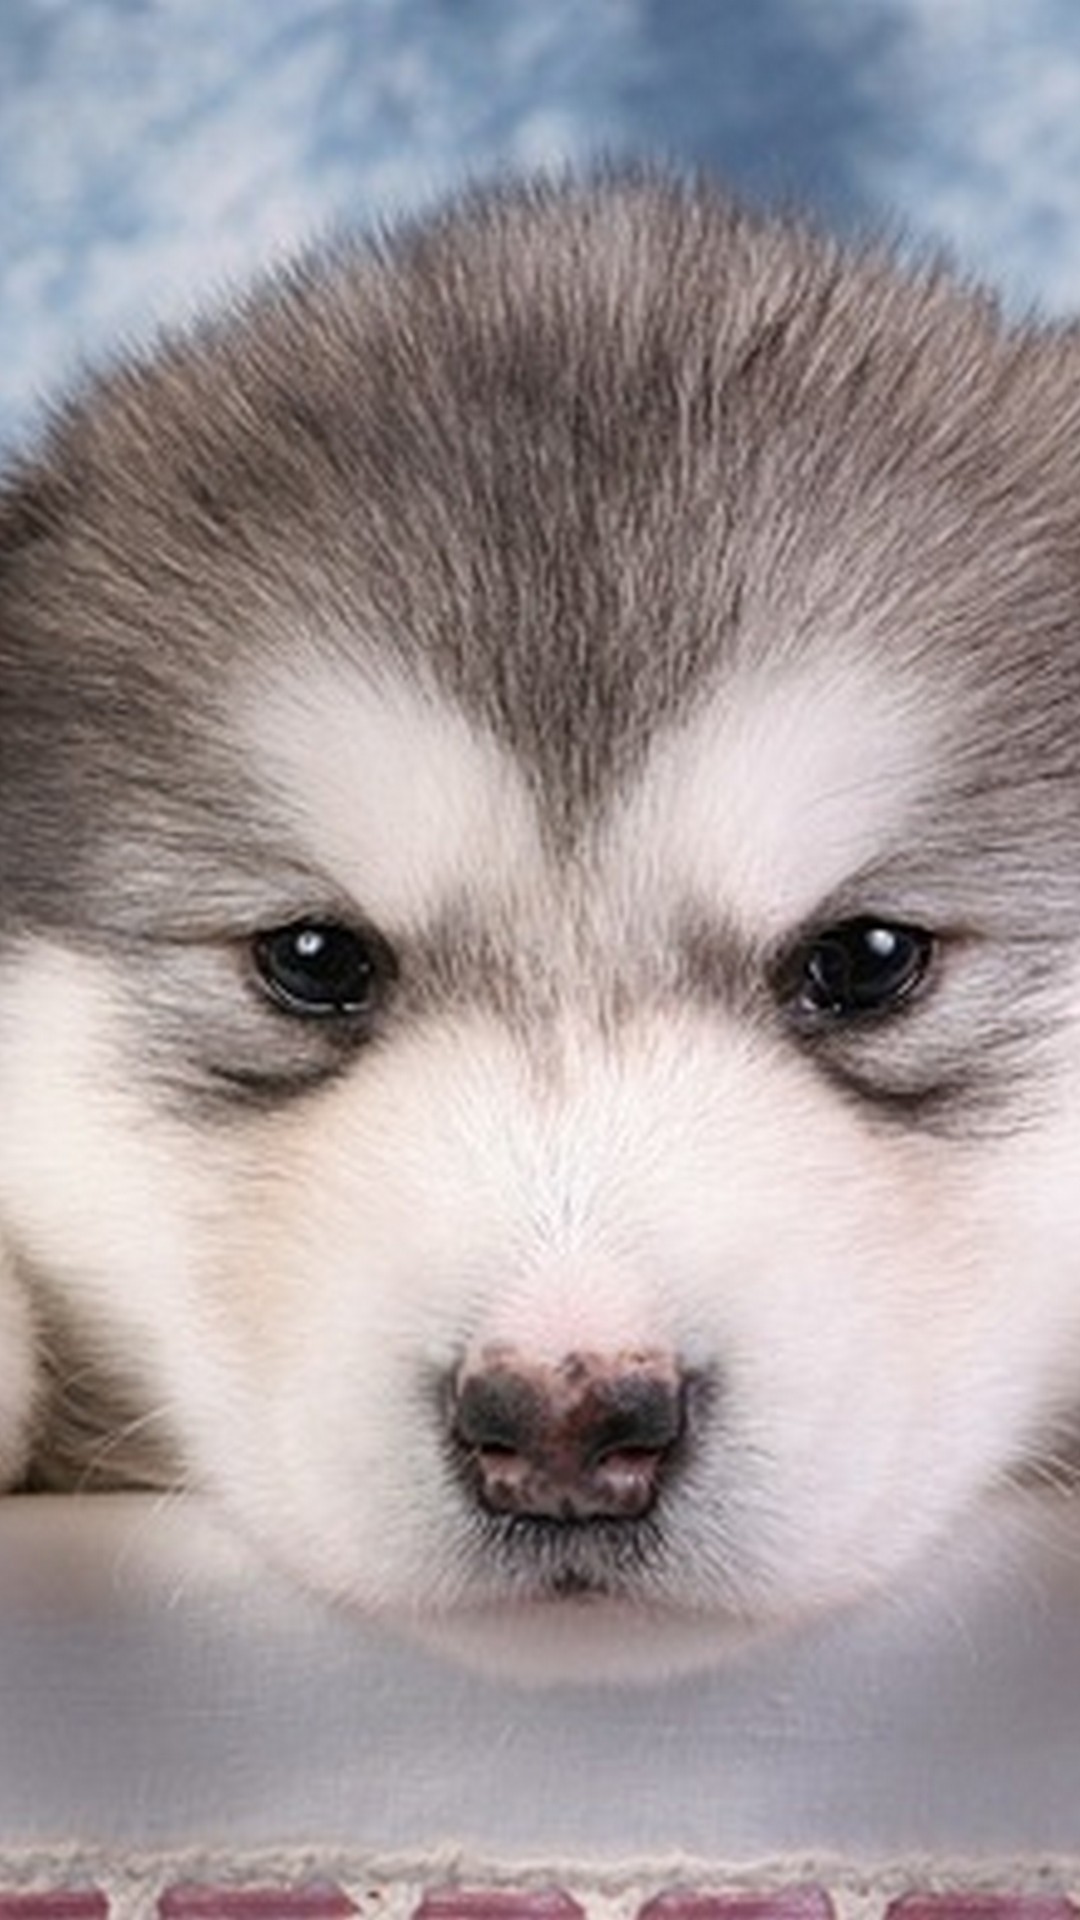 Cute Puppies Pictures Wallpaper Android with HD resolution 1080x1920